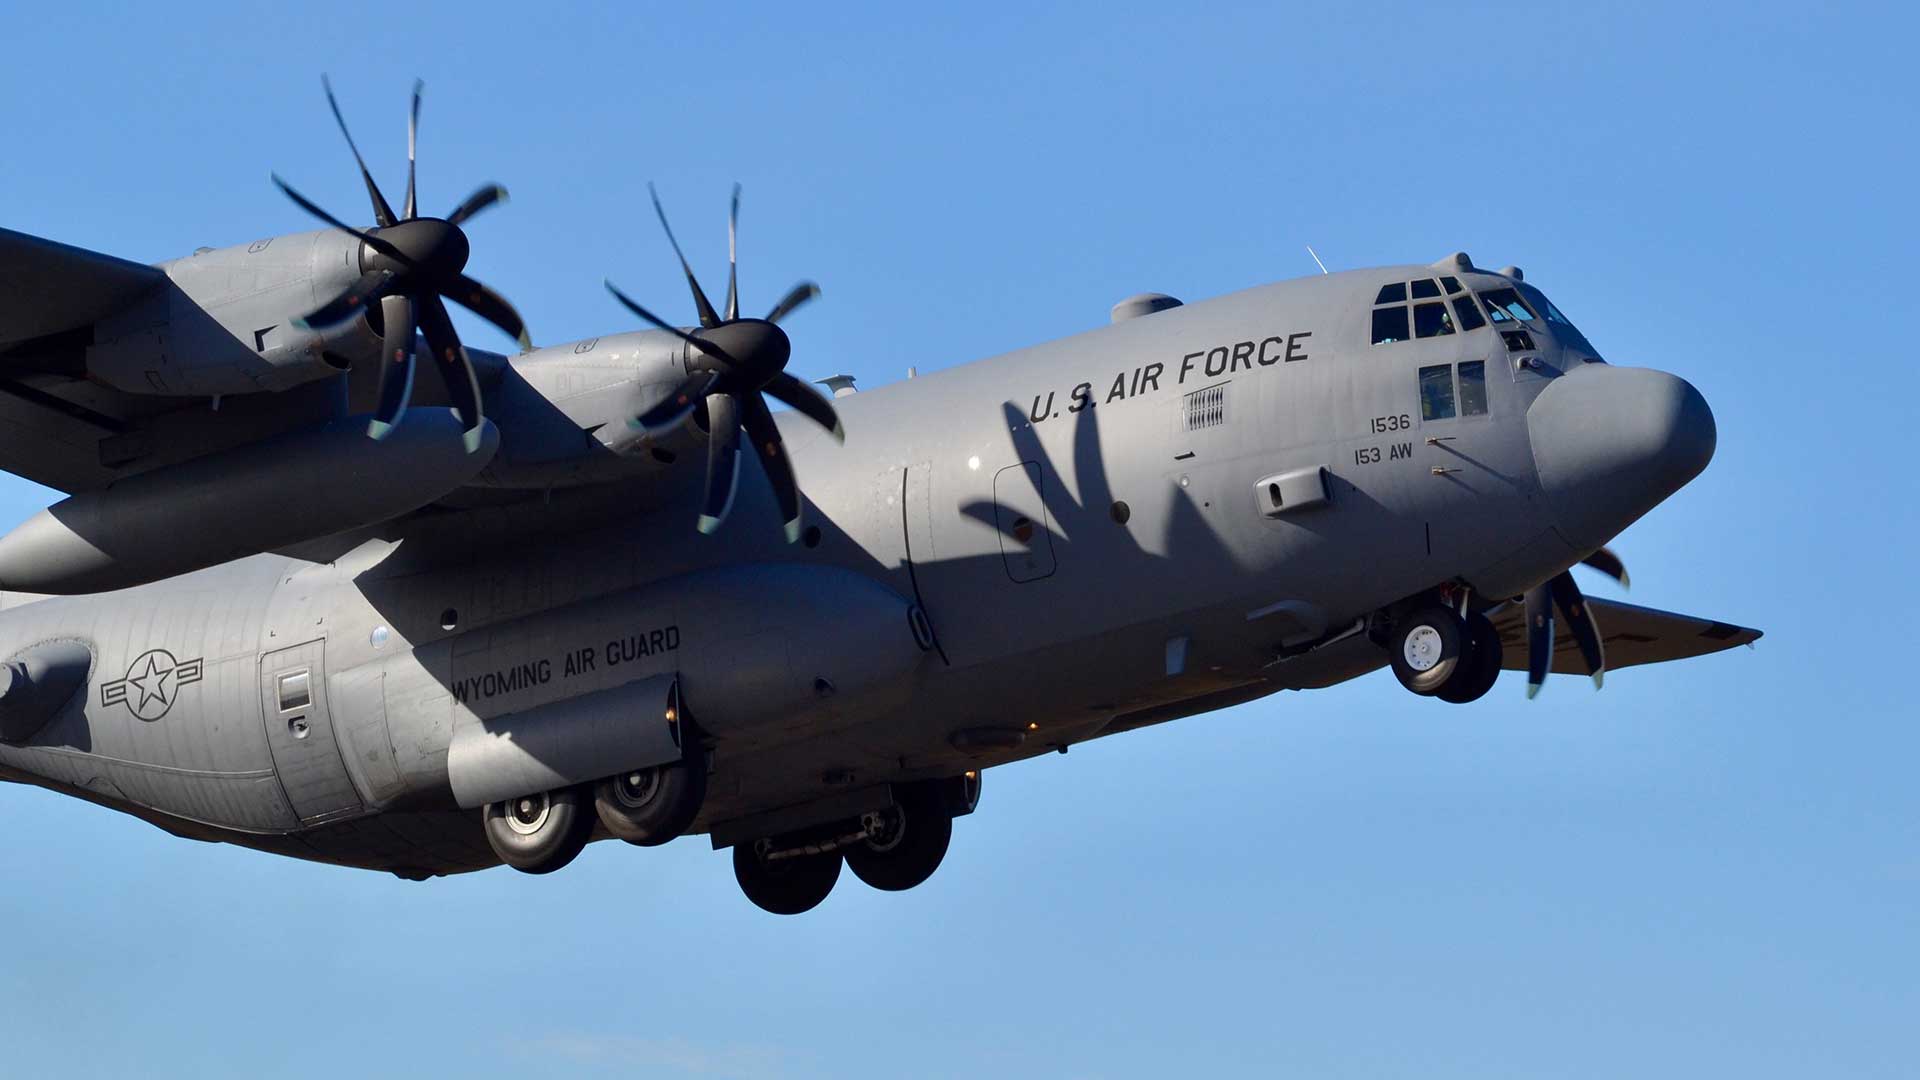 News | Air Force orders Collins Aerospace NP2000 propeller system for more C -130H | Collins Aerospace